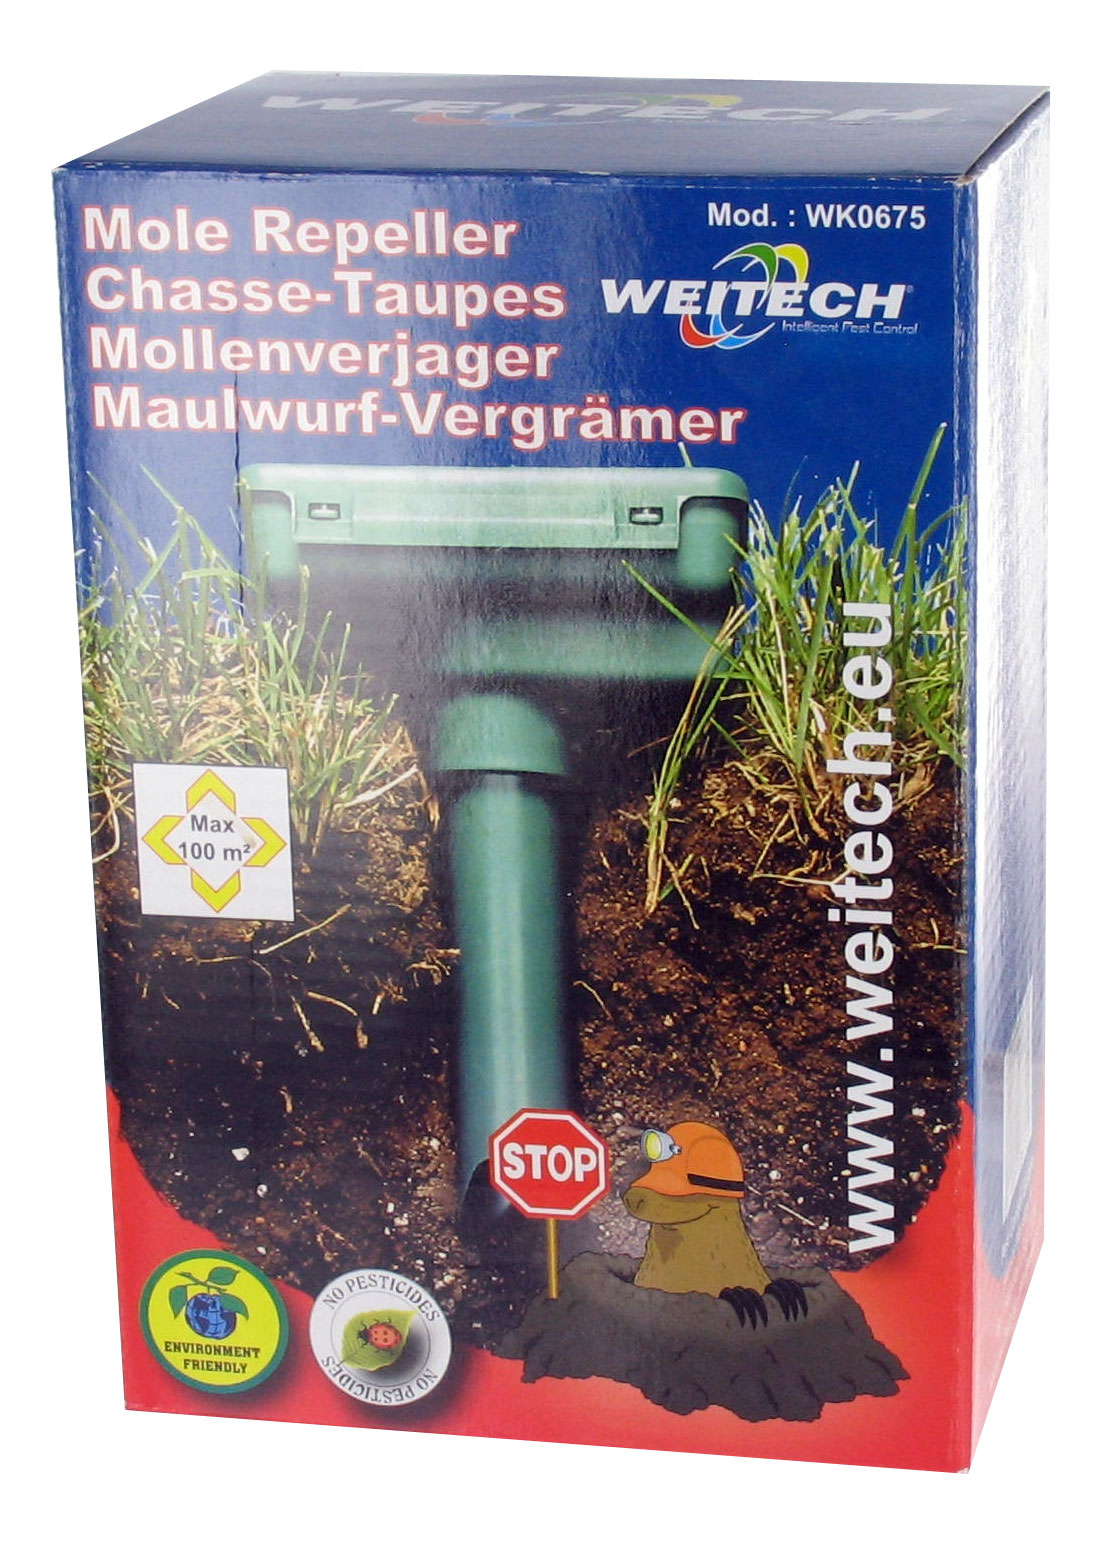 Mole repellent 100m2/ battery operated Weitech